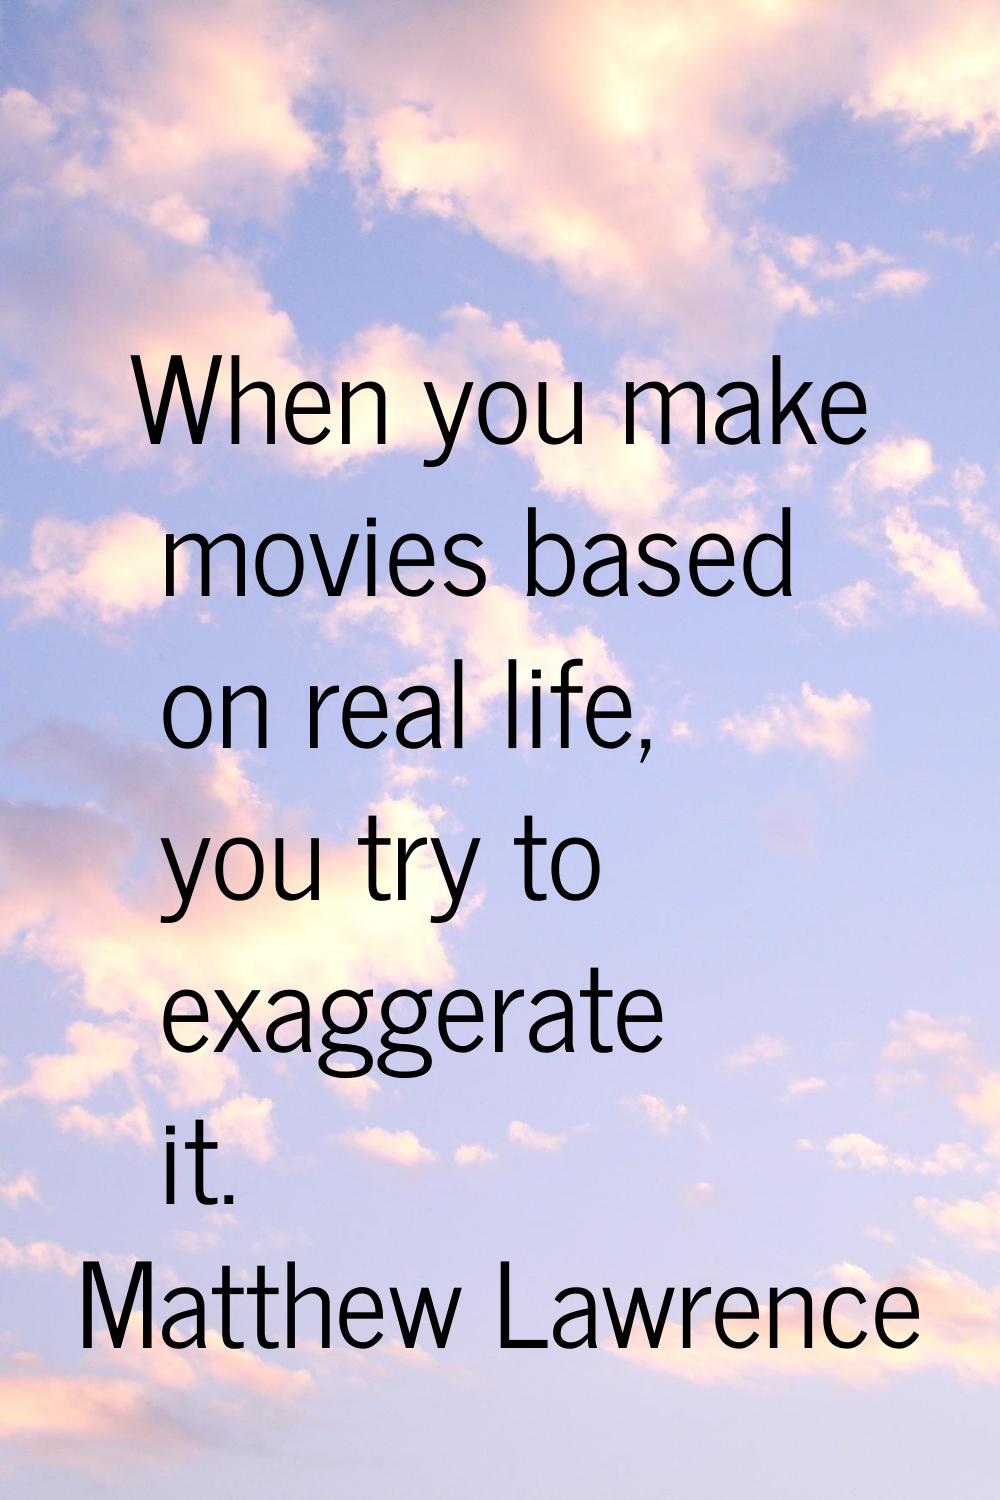 When you make movies based on real life, you try to exaggerate it.